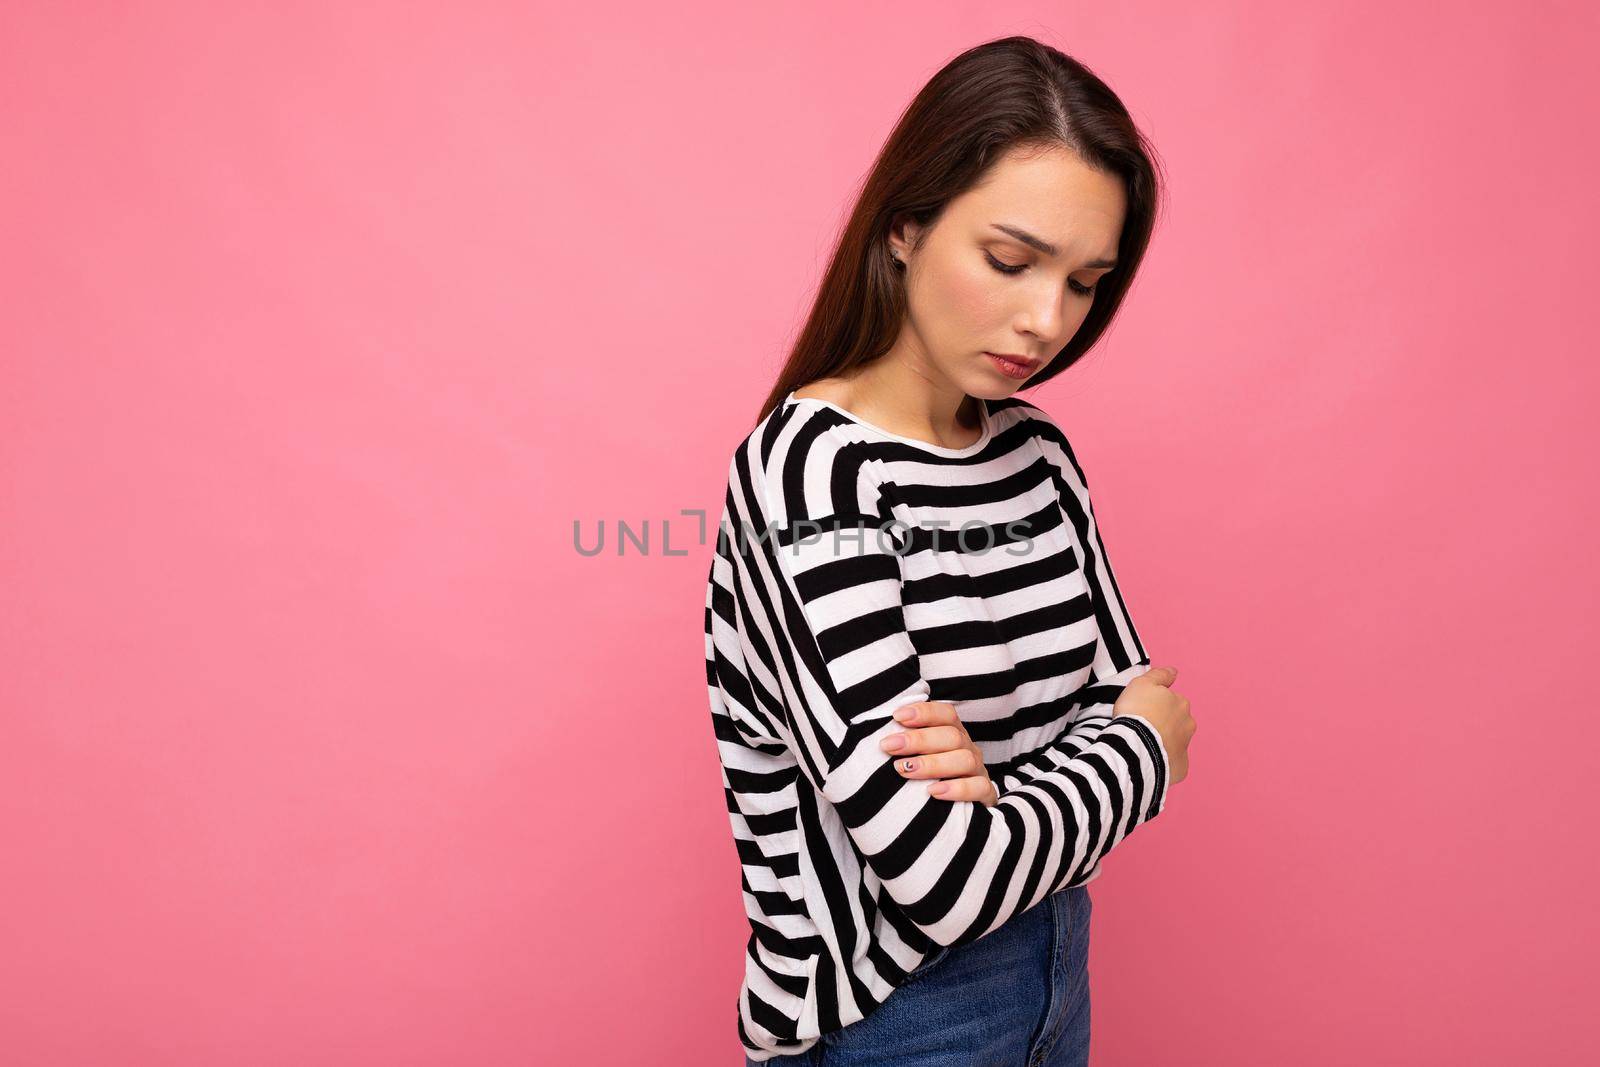 Cute attractive pretty young sad upset brunette woman wearing casual striped longsleeve isolated over colorful background with copy space.